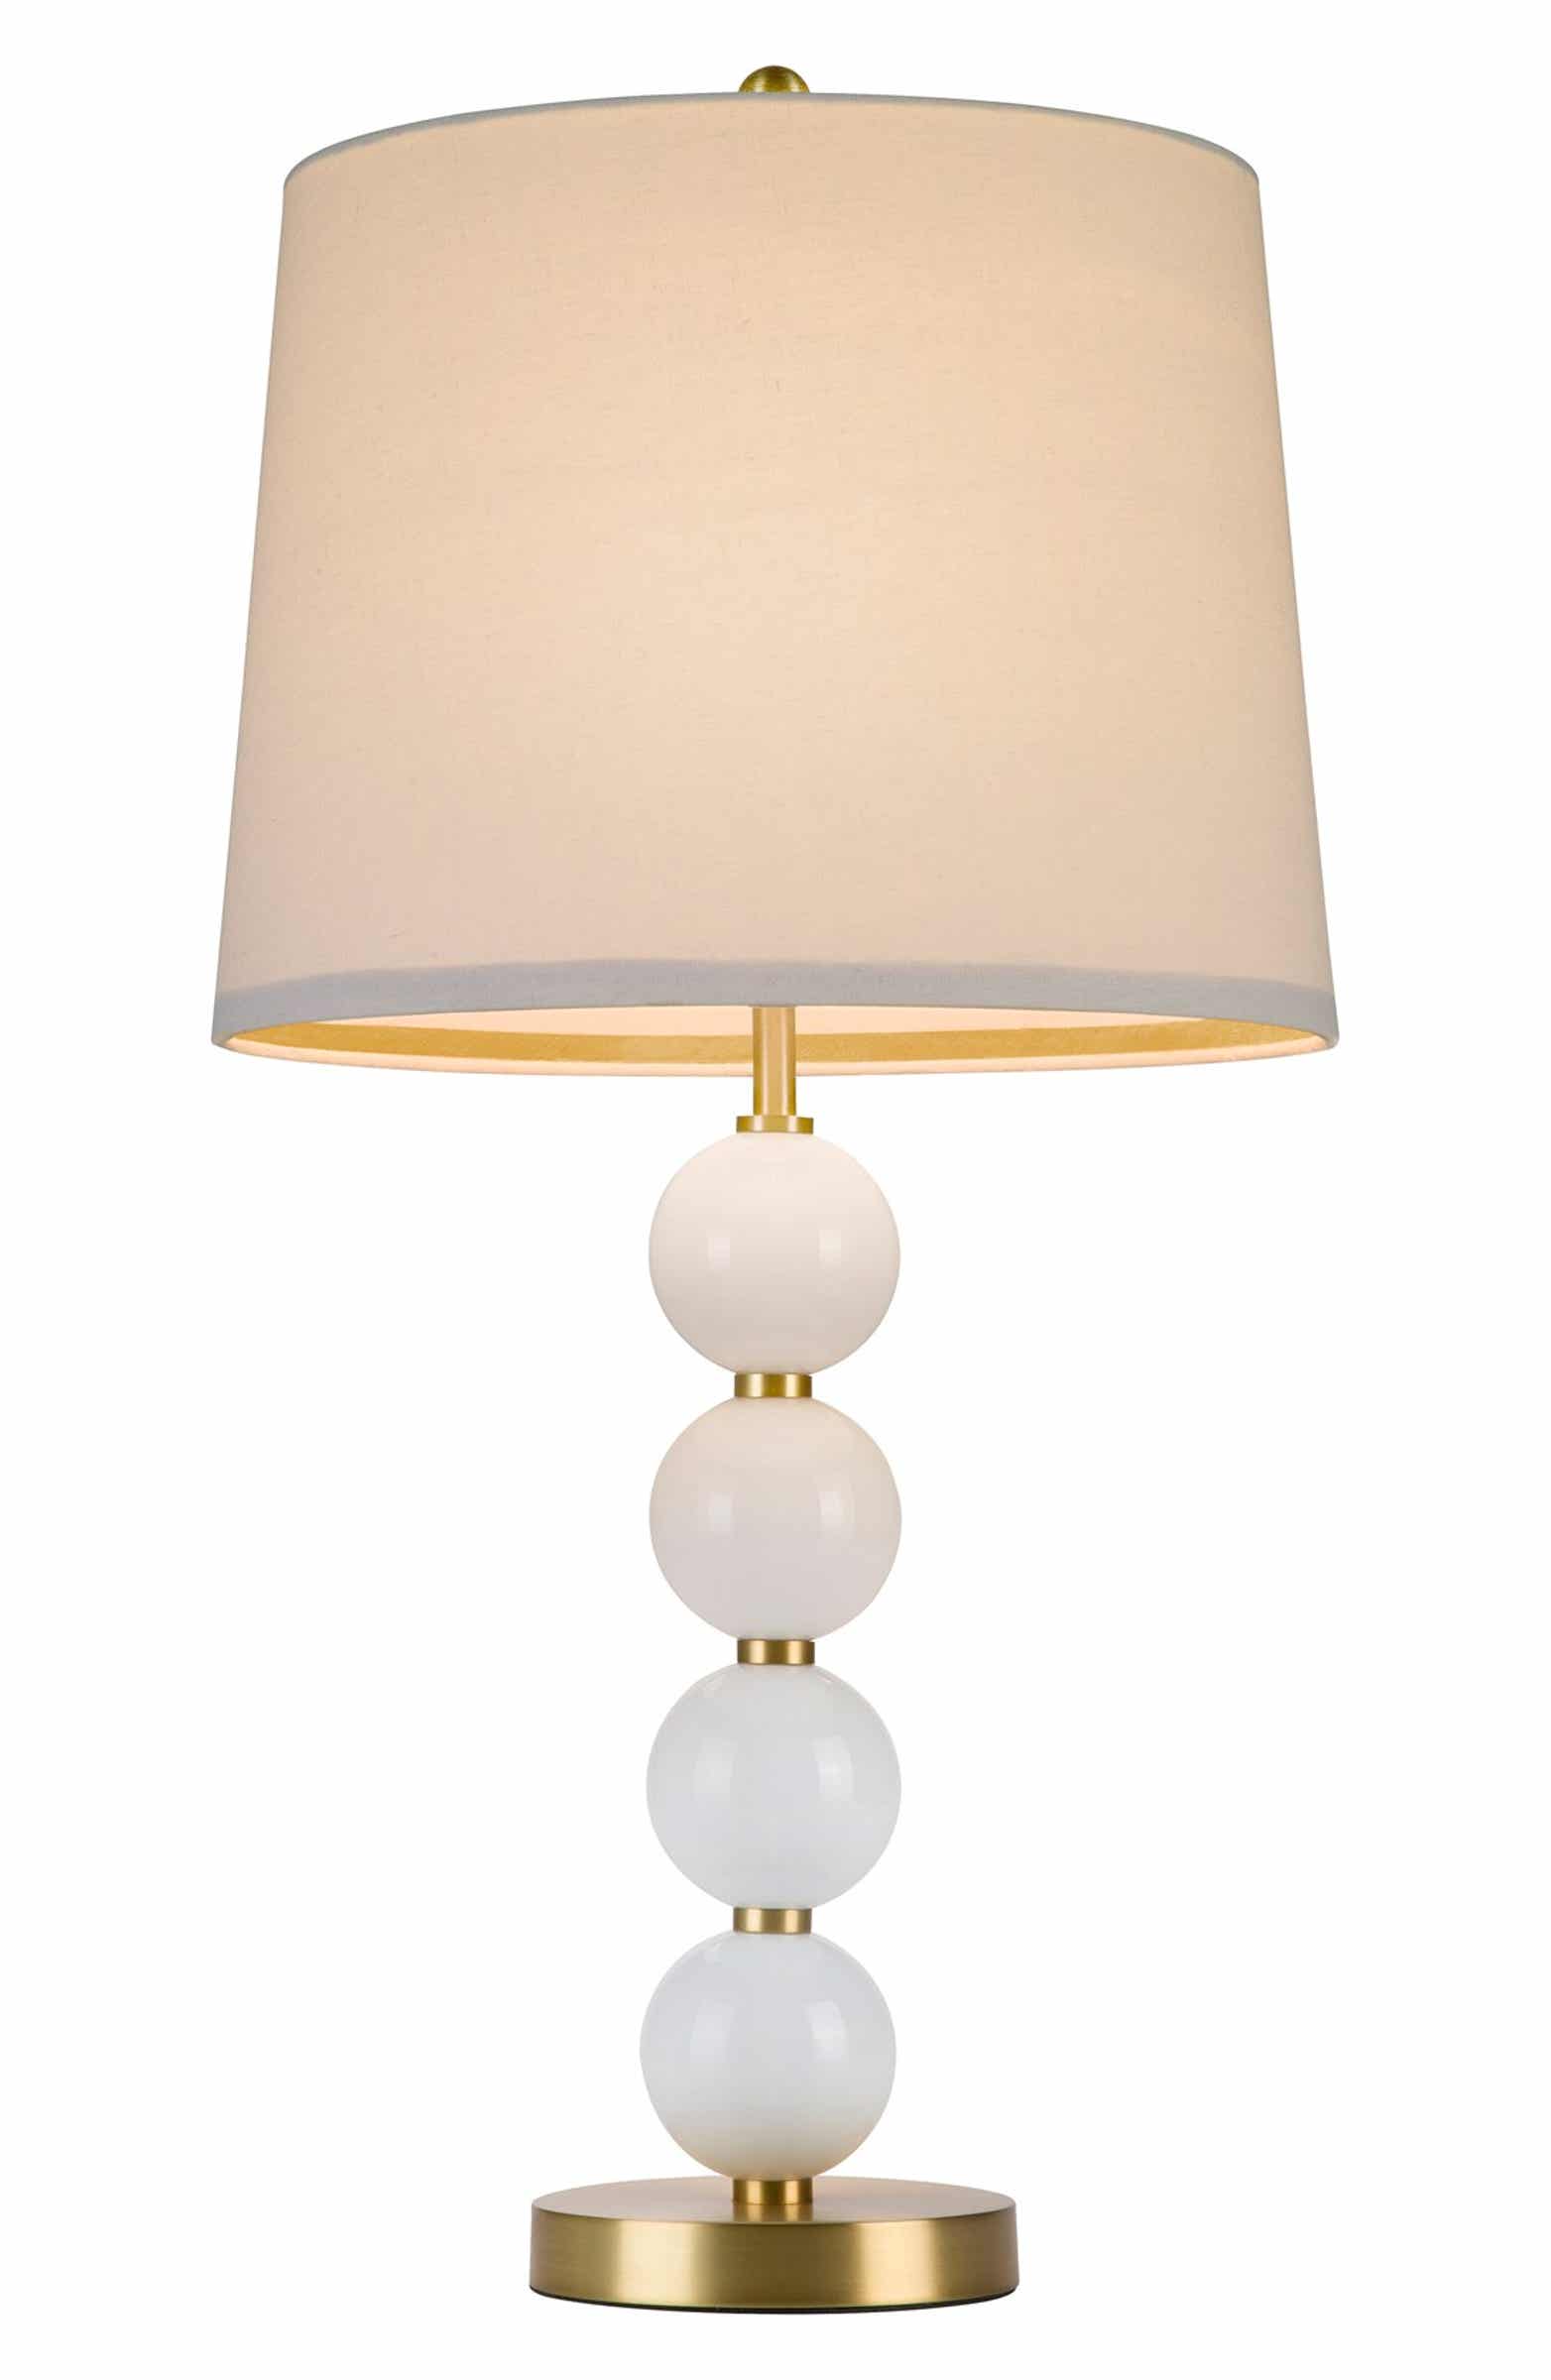 Bedroom Dreams: Stacked Ball Table Lamp